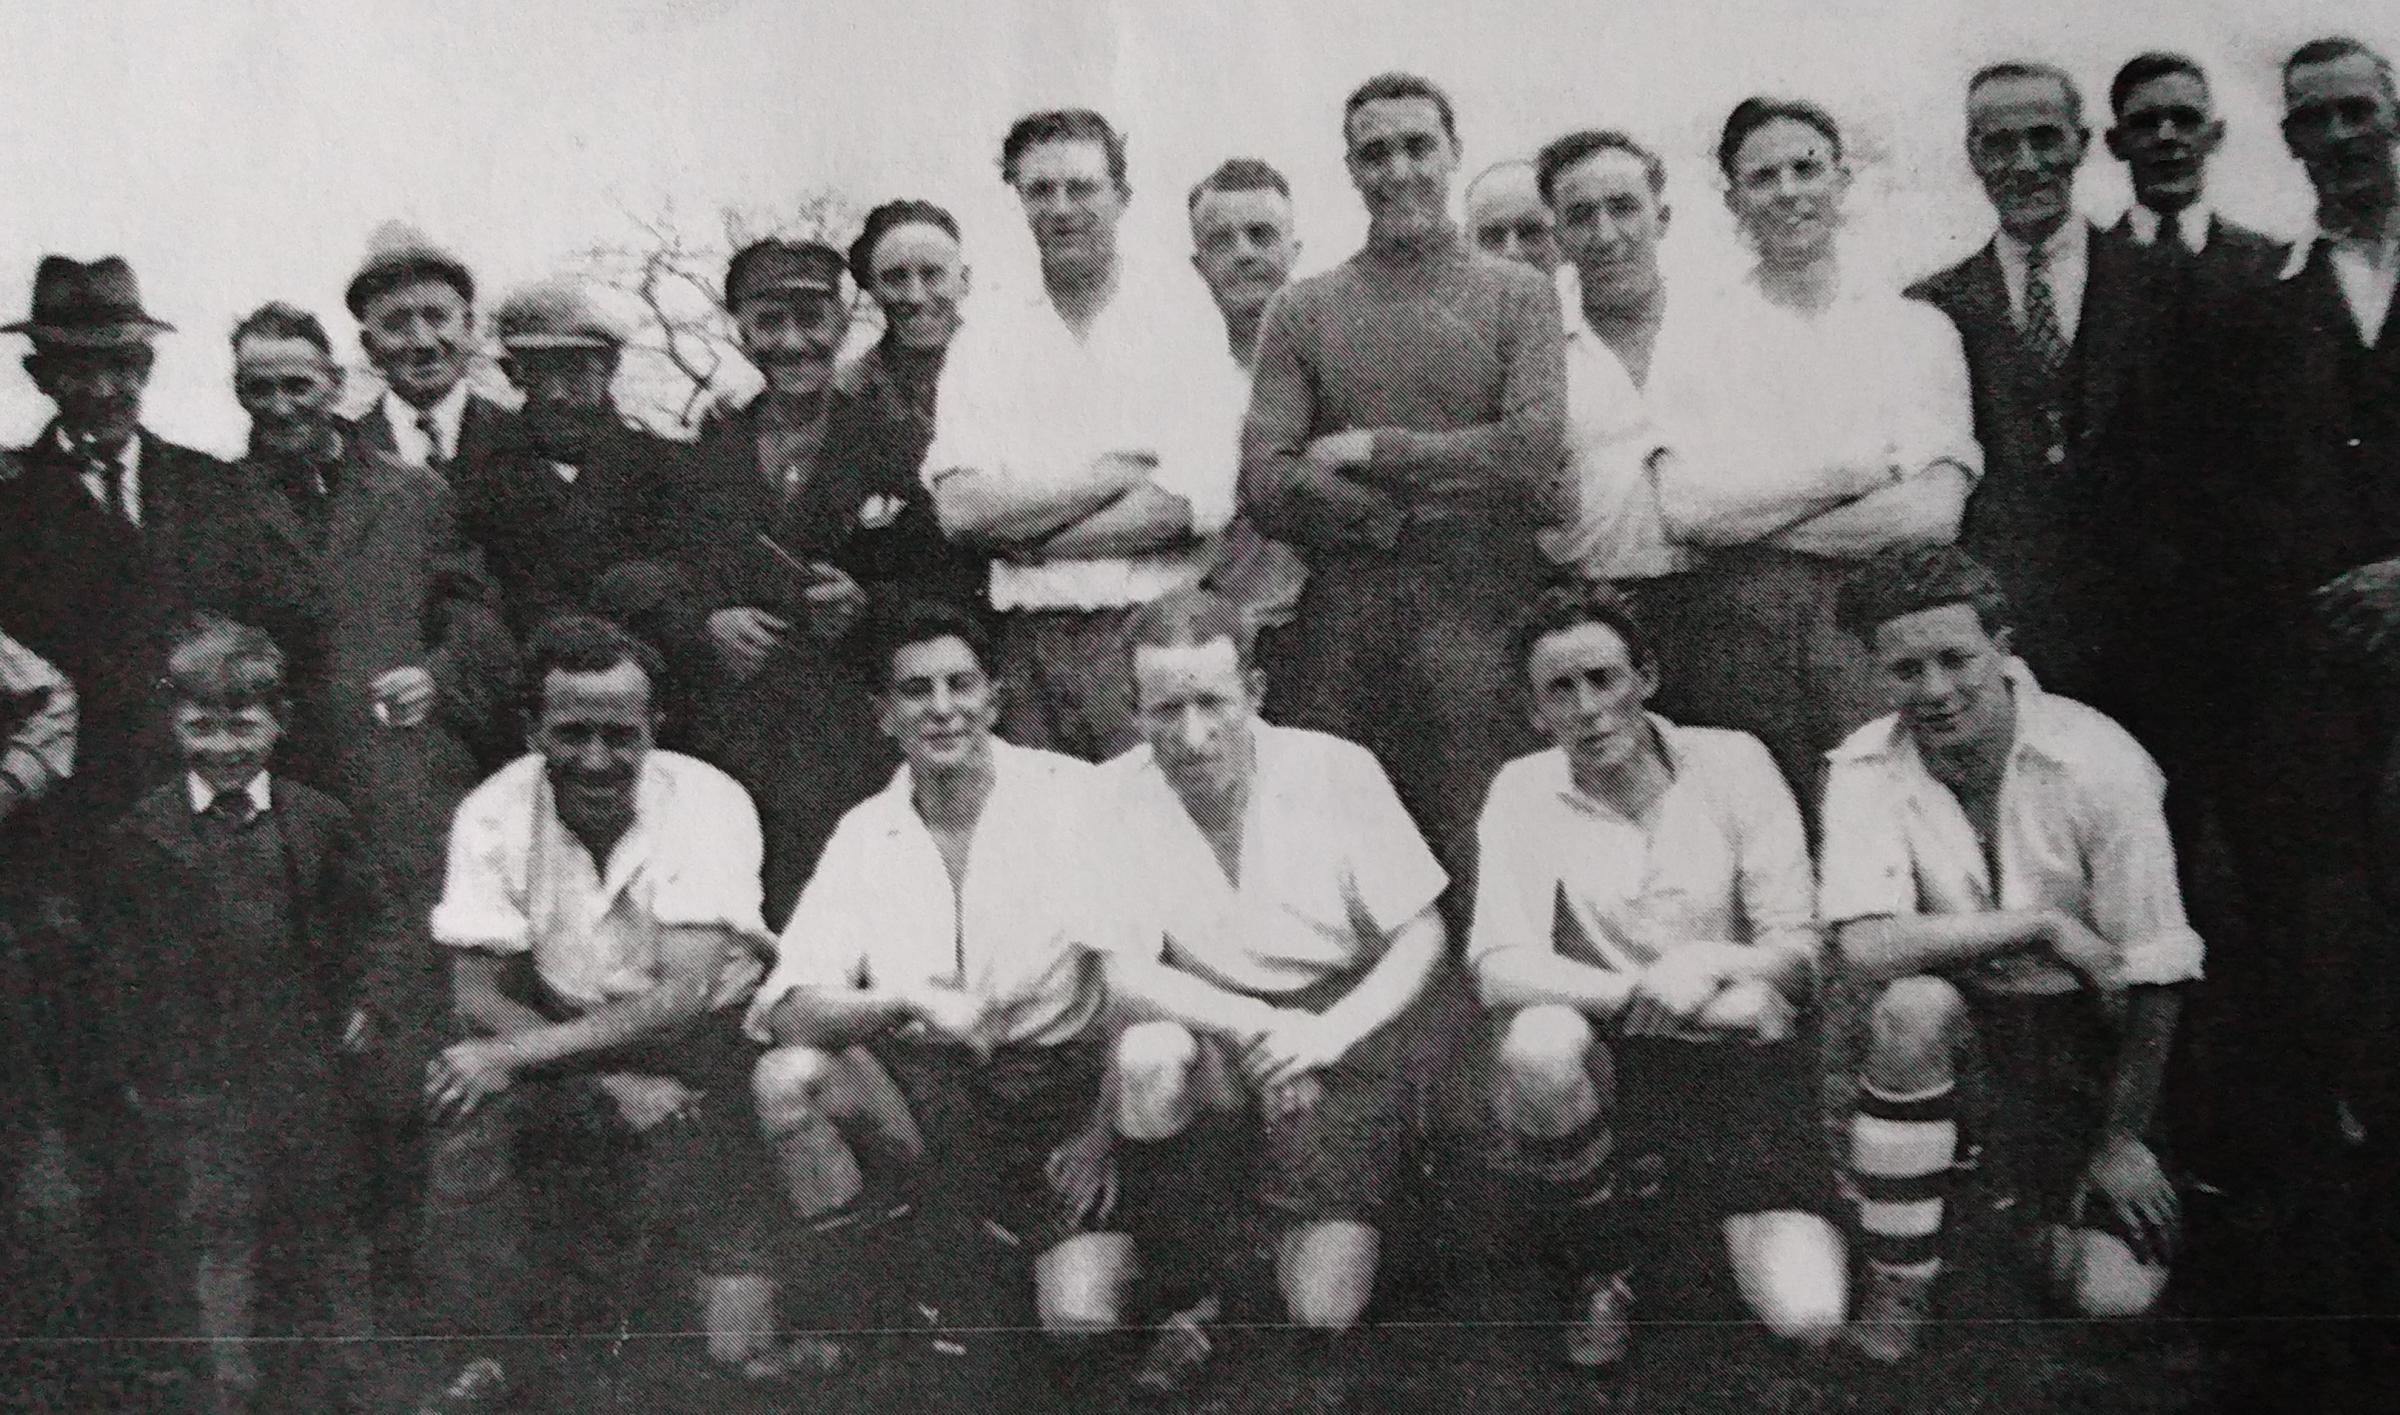 The Great Western Railway Saturday League team pictured in the late 1940s. The picture was submitted by Ray Limrick